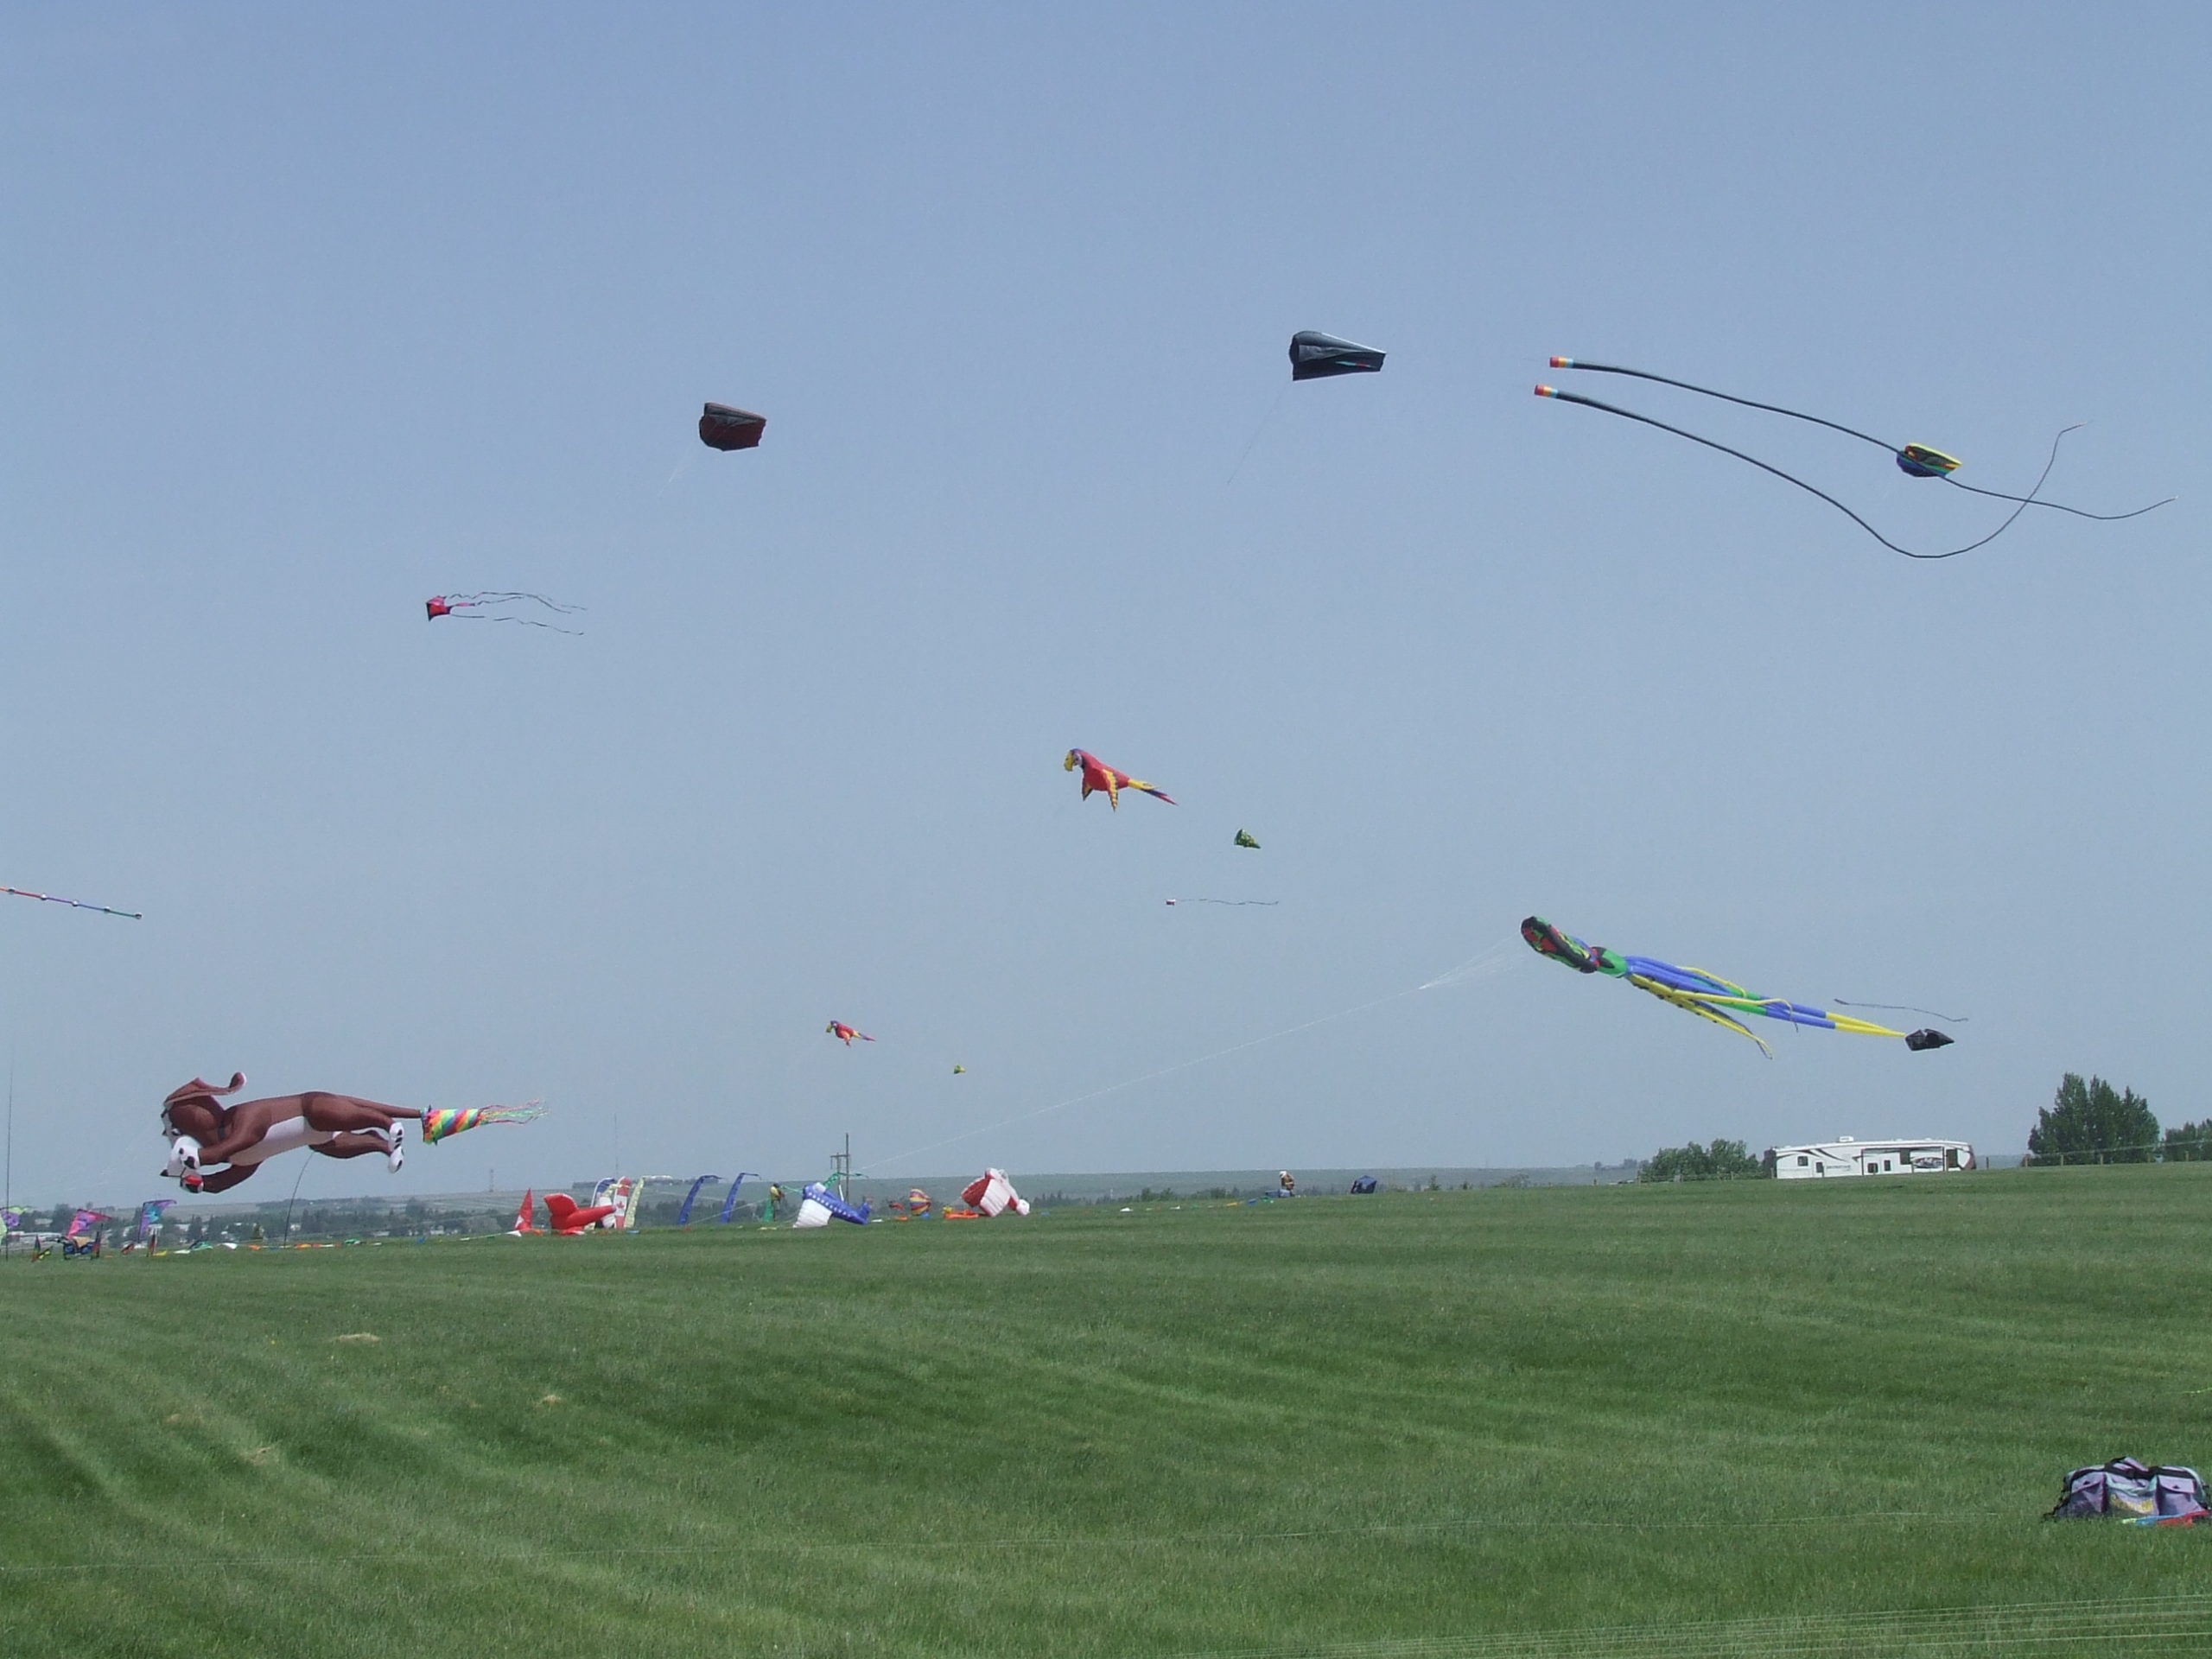 We Flew A Kite! At the SaskPower Windscape Kite Festival in Swift Current!